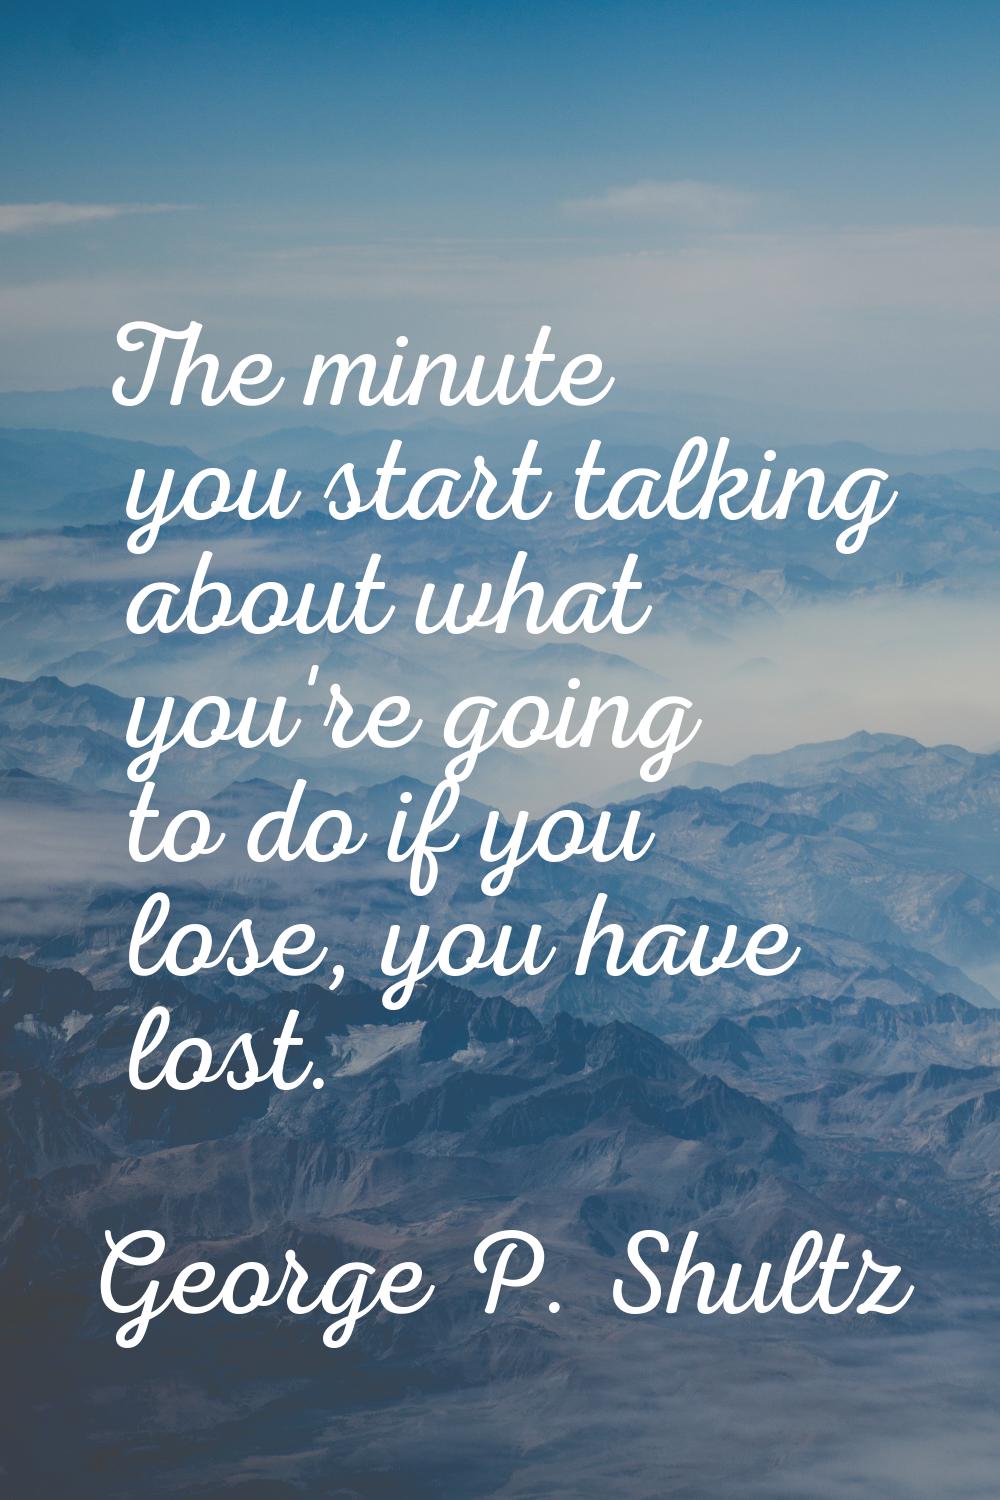 The minute you start talking about what you're going to do if you lose, you have lost.